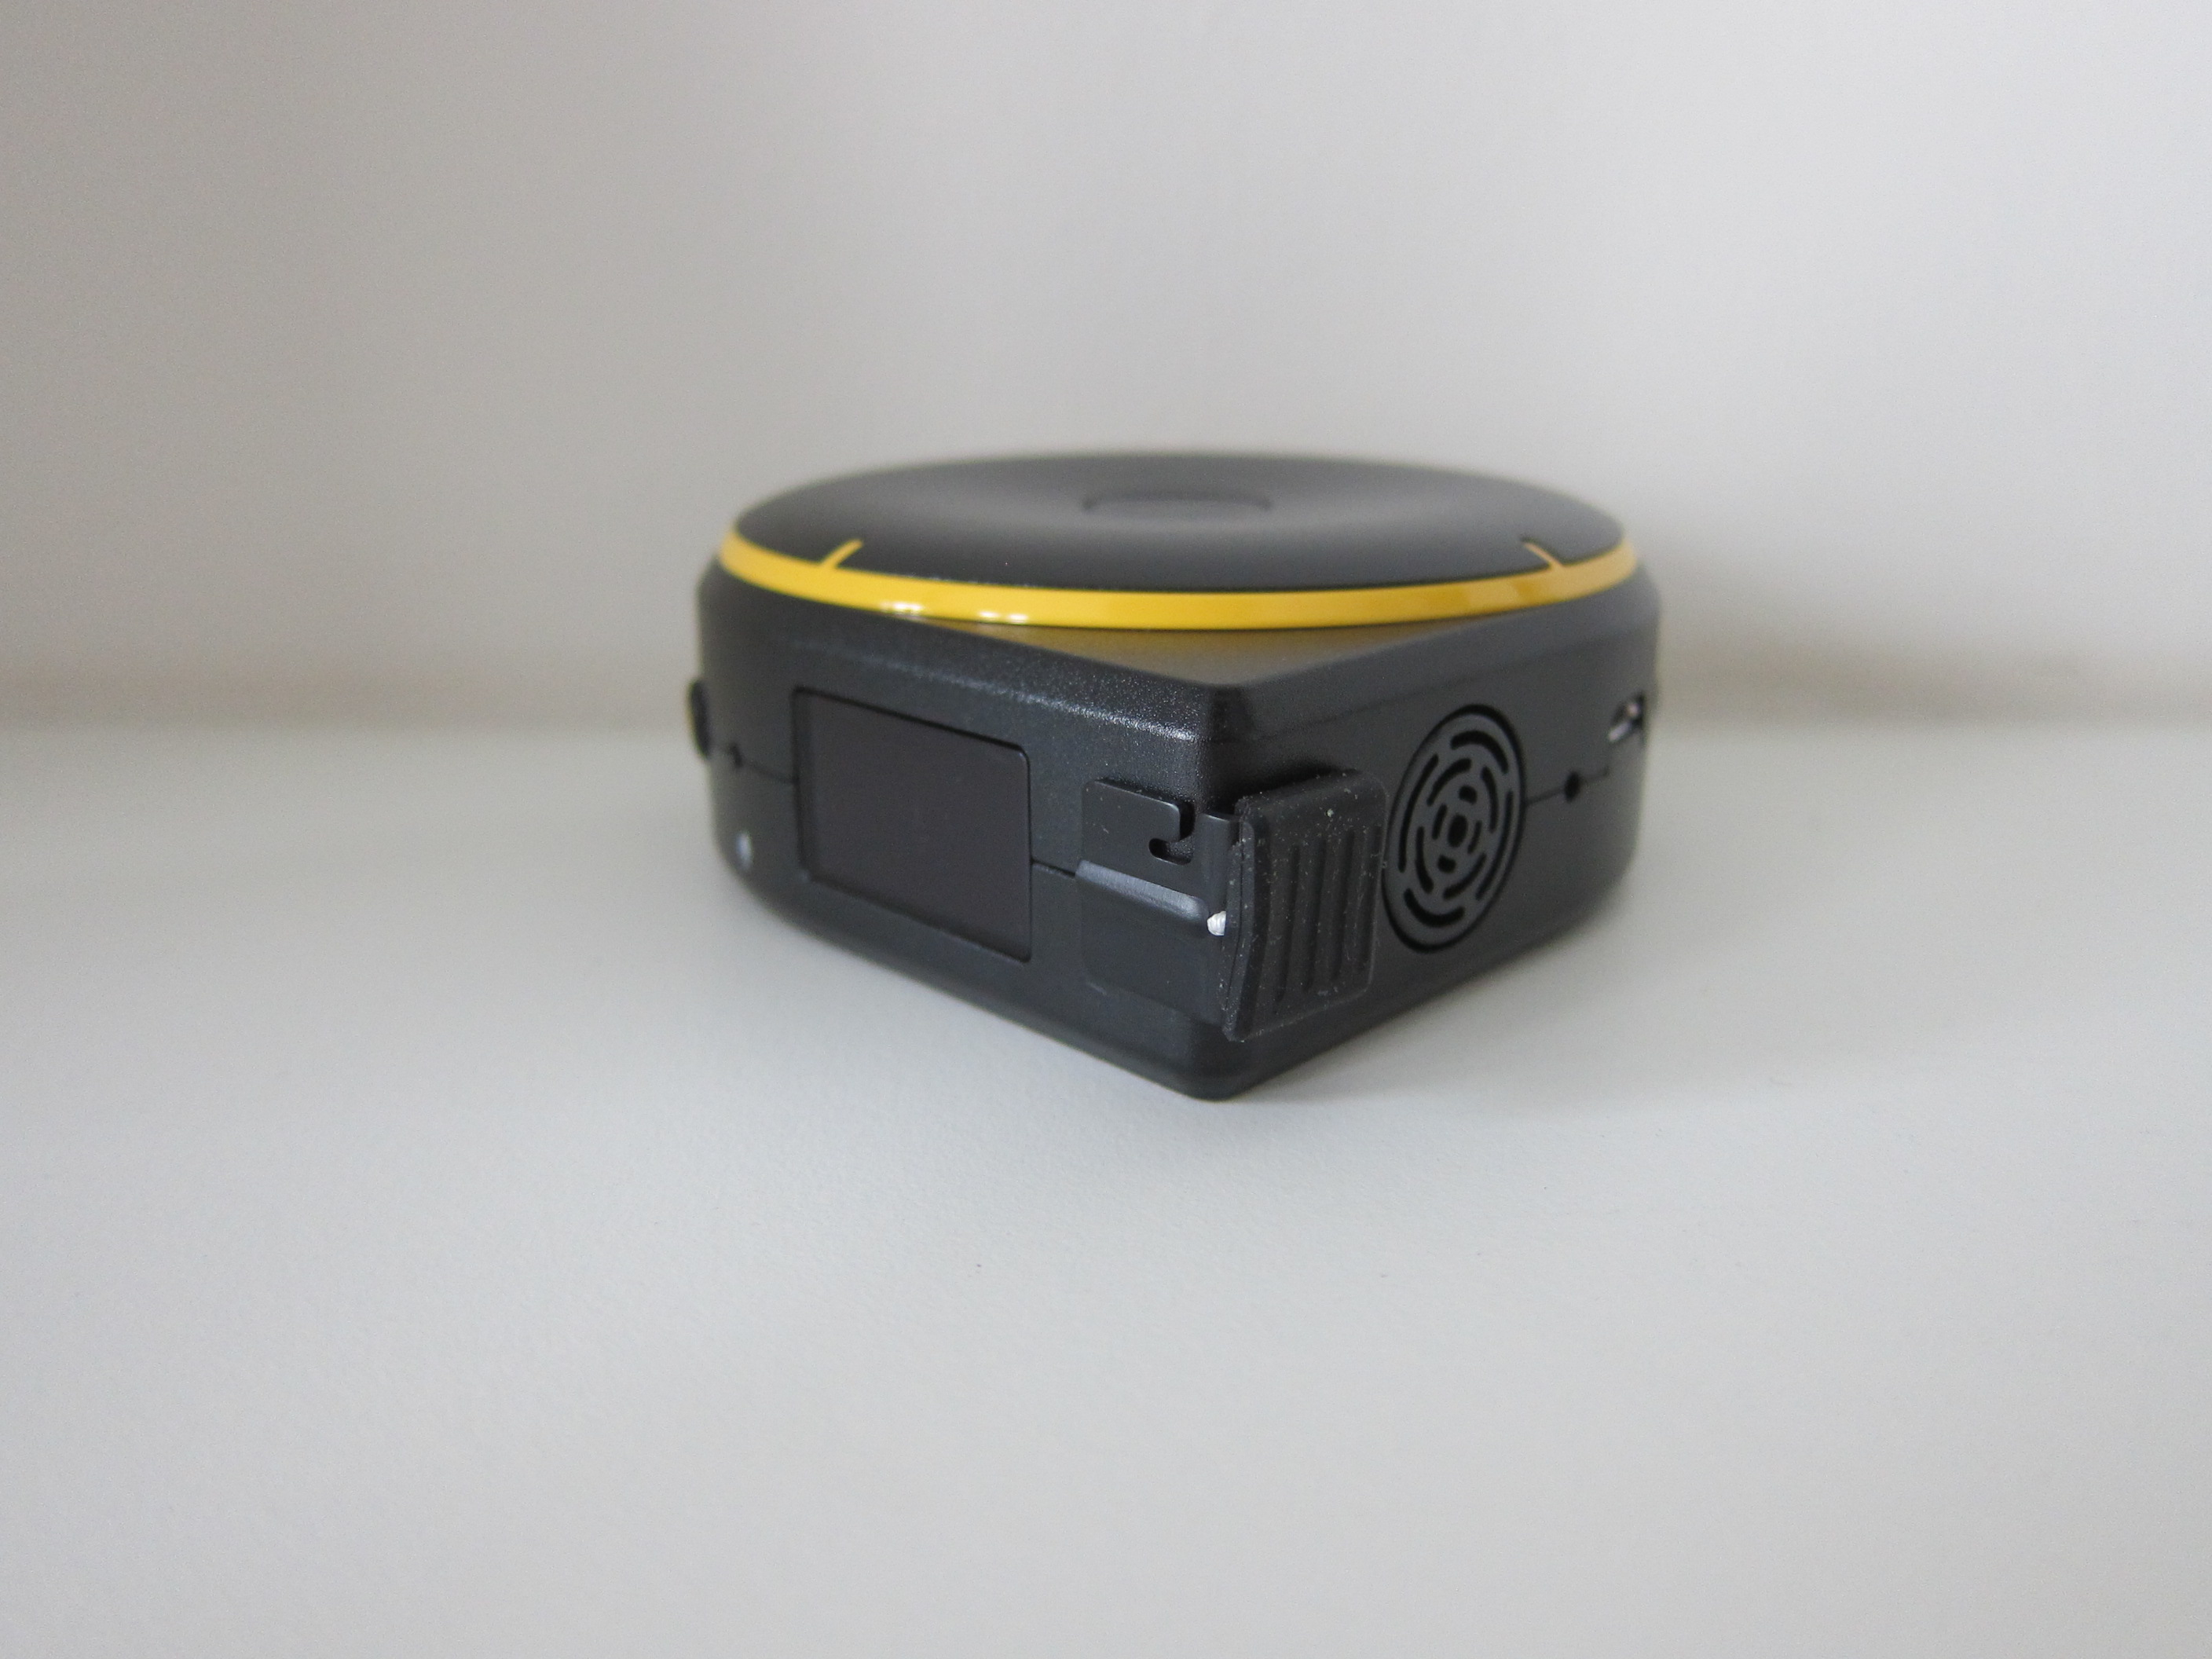 Measure and Organize with Bagel Smart Tape Measure